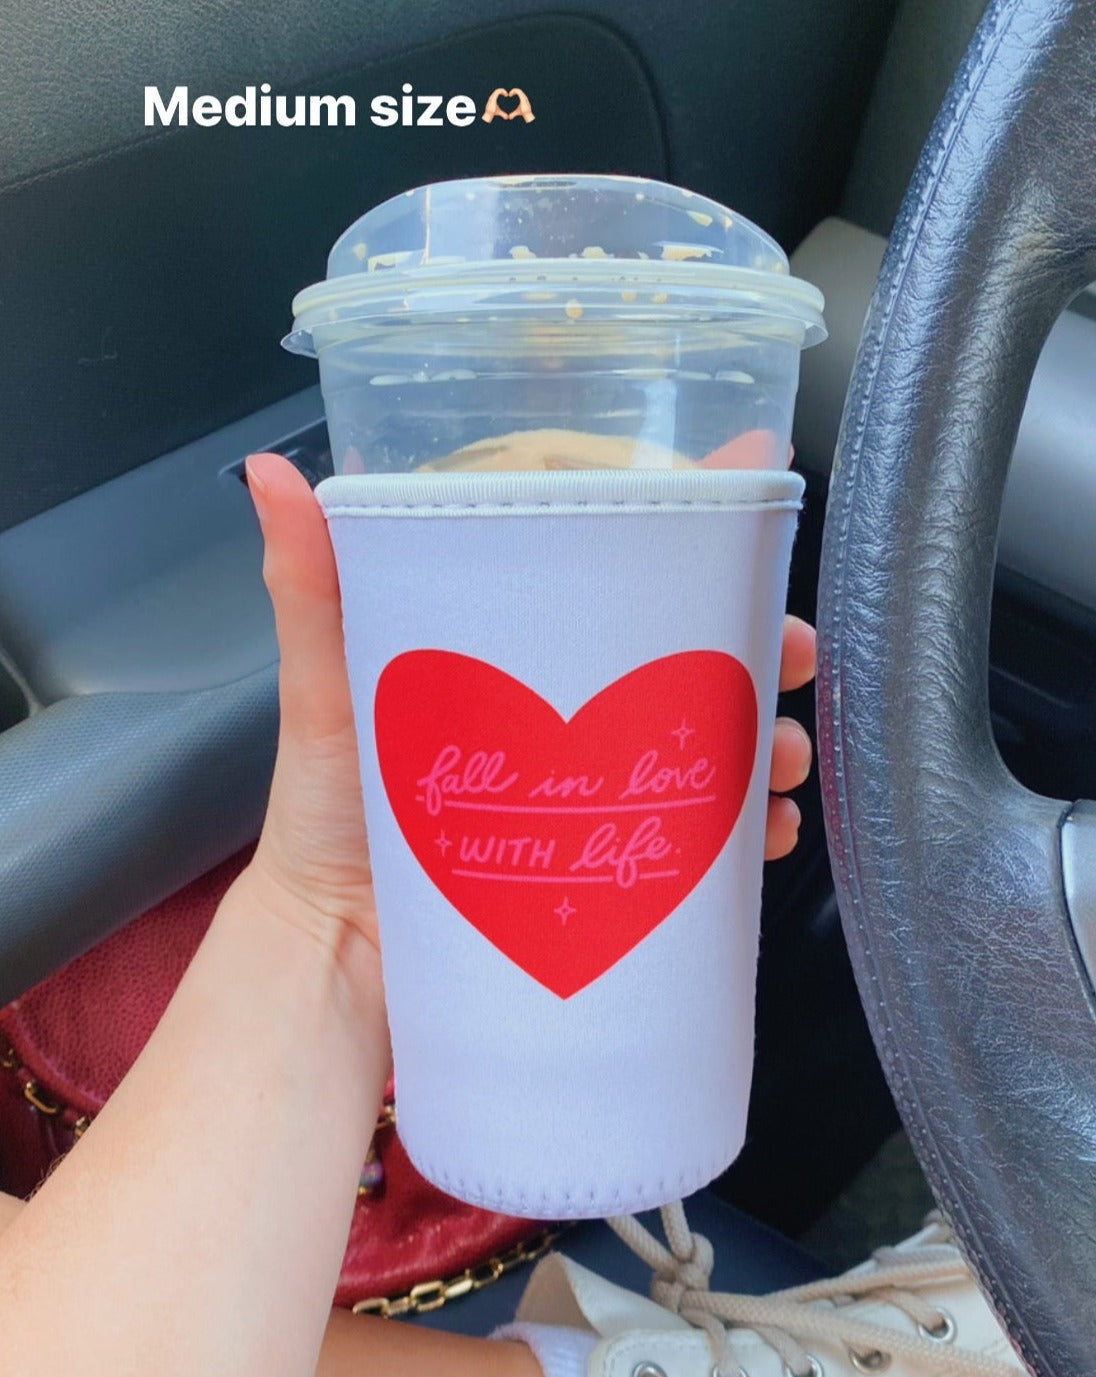 OOPSIE SALE: 'FALL IN LOVE WITH LIFE' HEART ICED COFFEE COOZIE